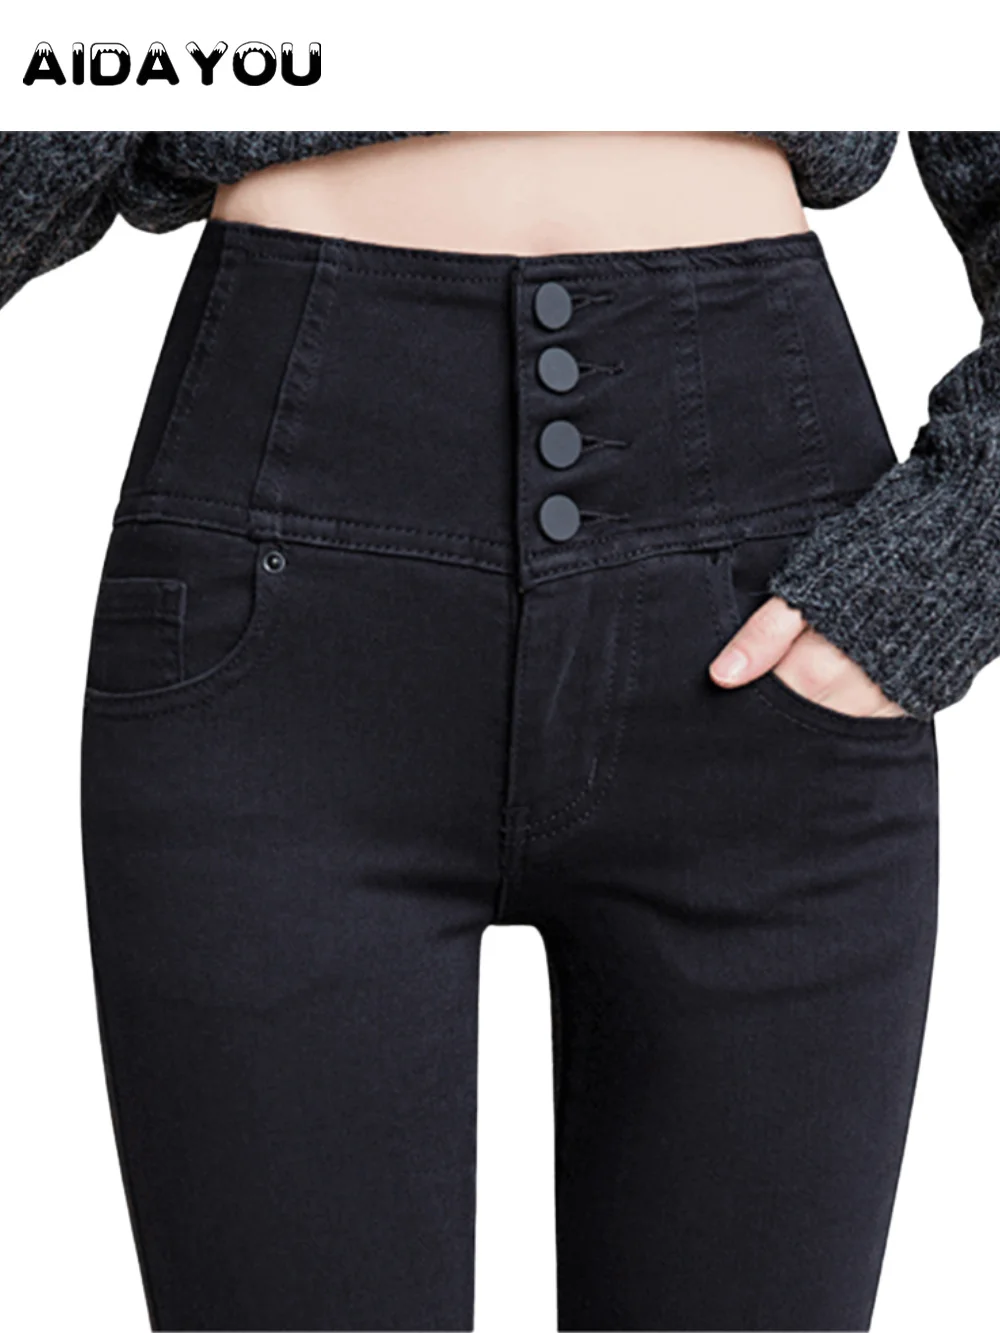 

High Waisted Jeans Button Front for Women Stretch Denim Black Petite XS - 4XL Dress Pants With Pocket ouc433